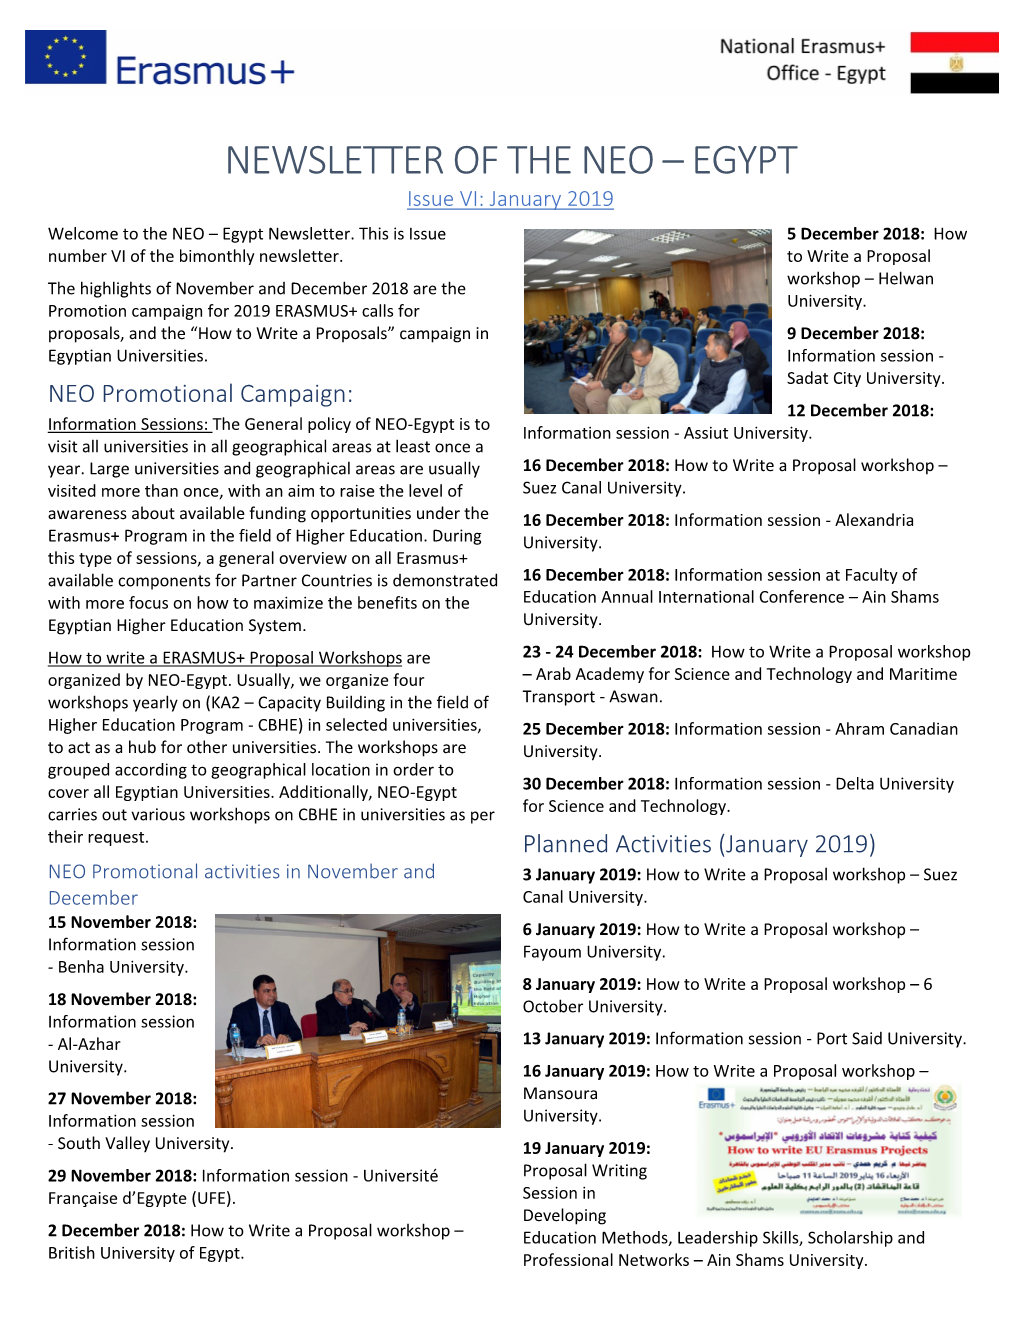 NEWSLETTER of the NEO – EGYPT Issue VI: January 2019 Welcome to the NEO – Egypt Newsletter